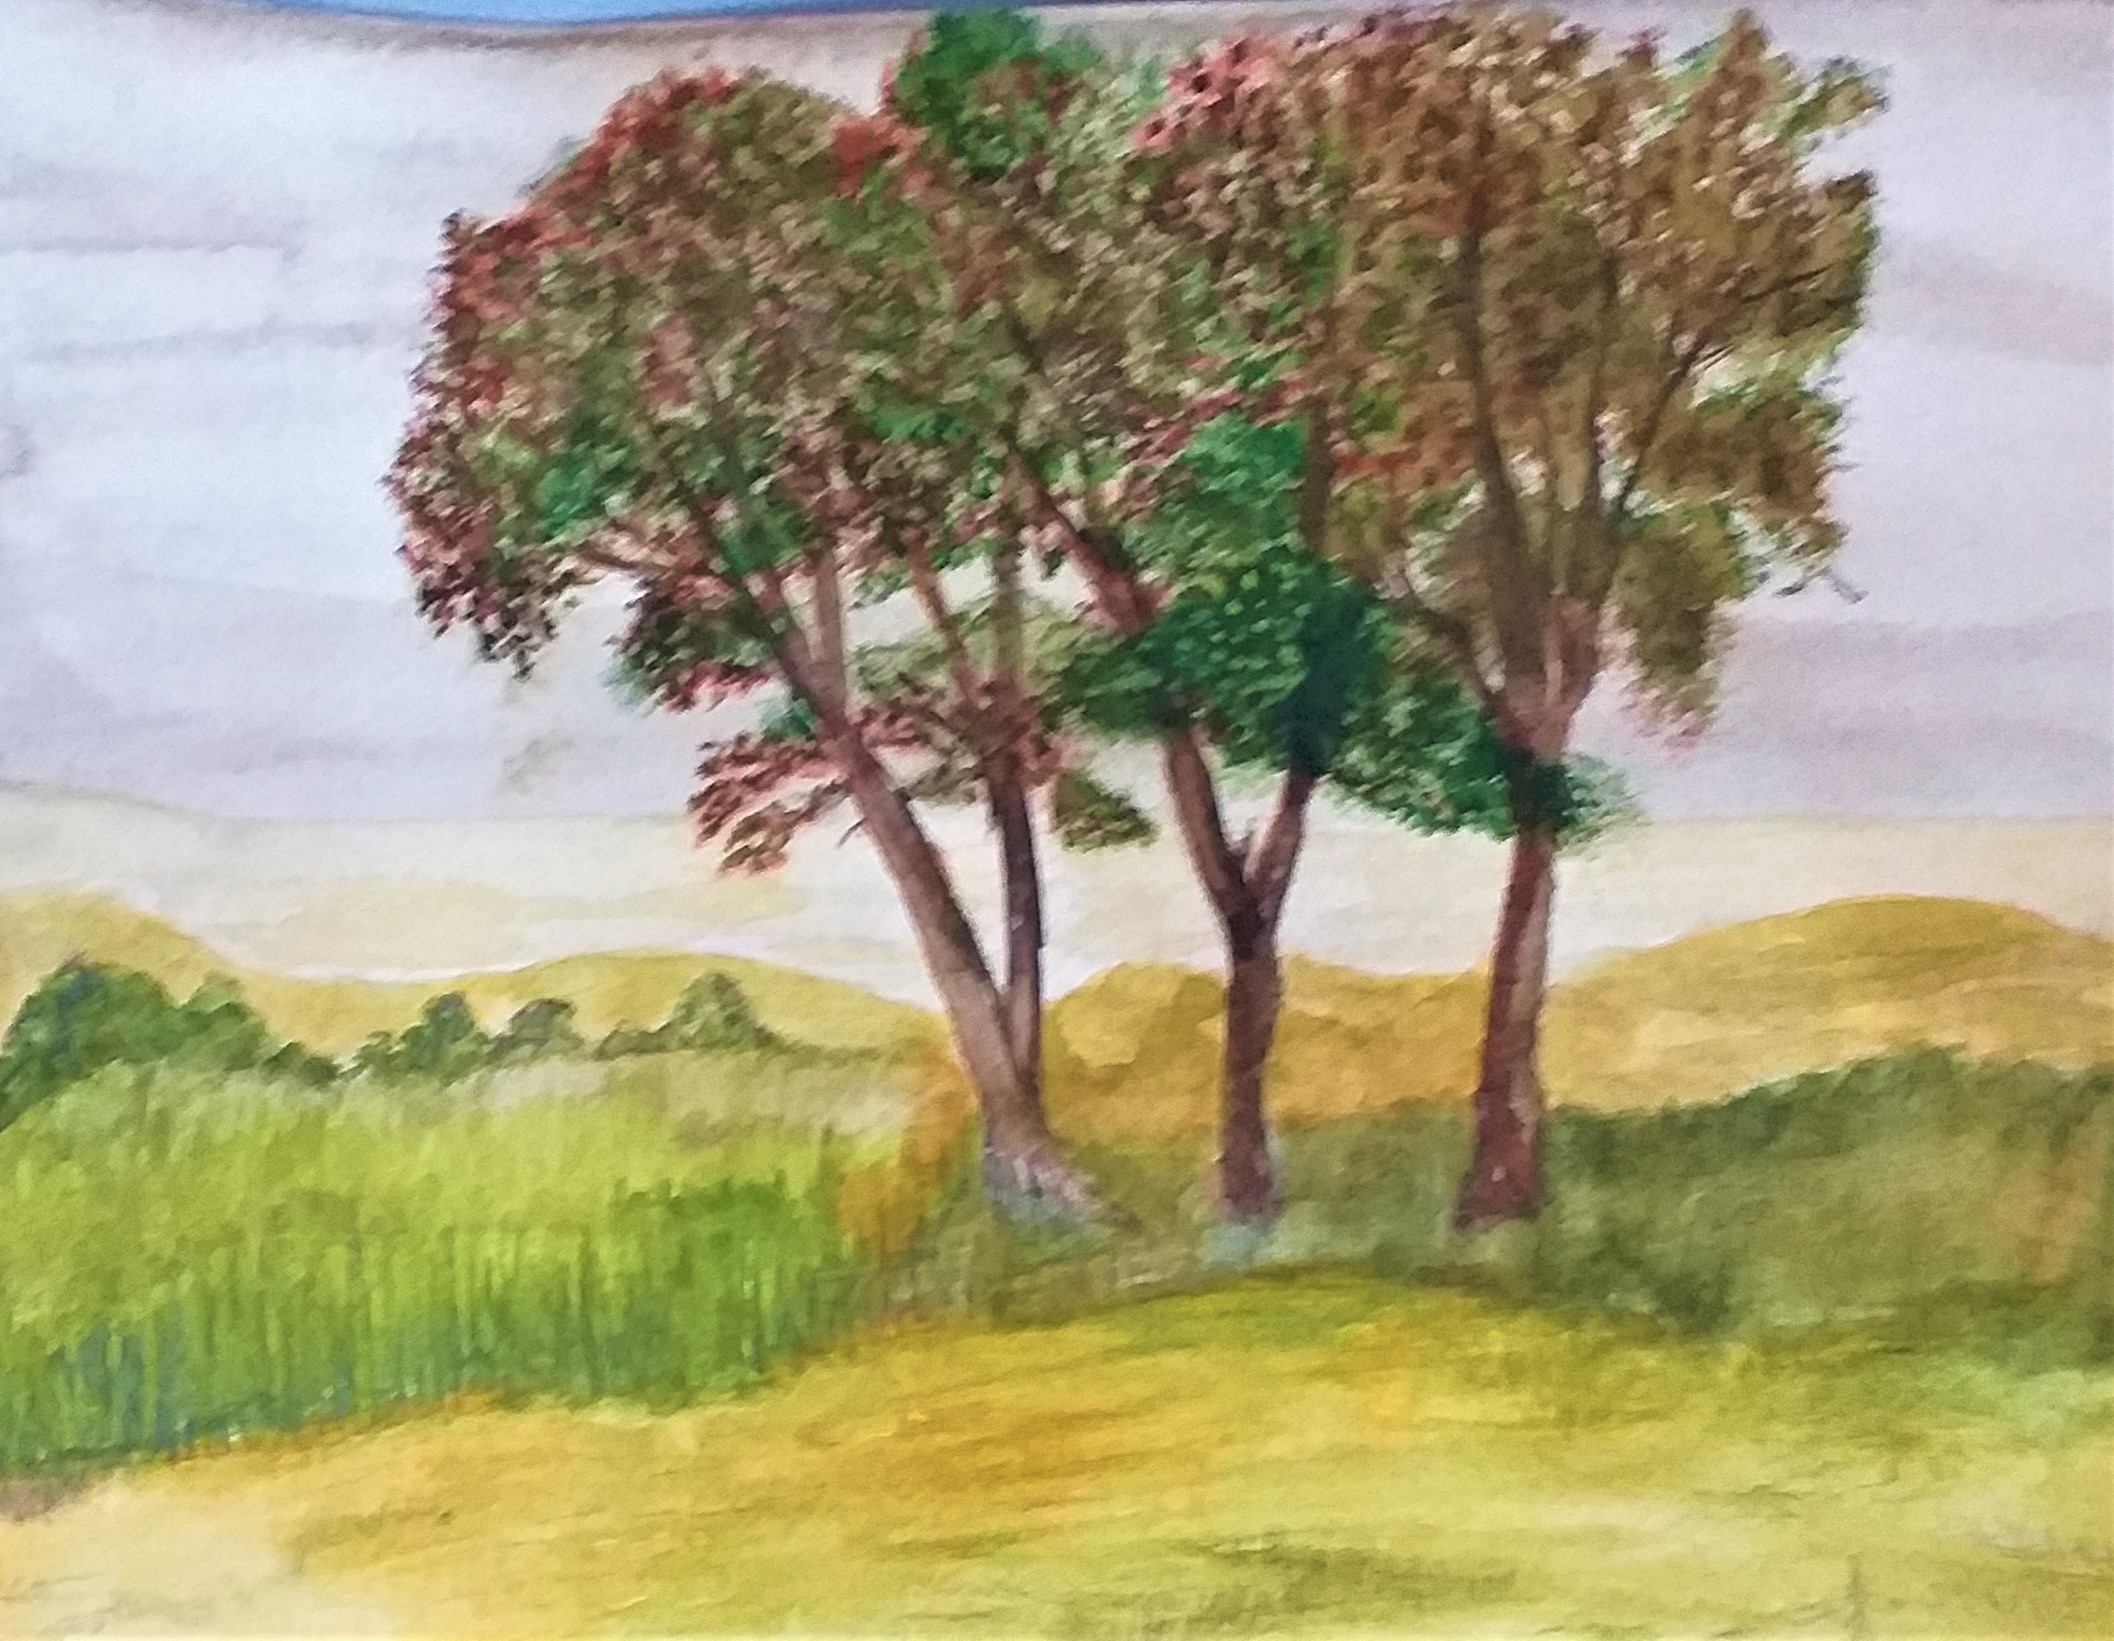 Work created at Watercolour Art Course 